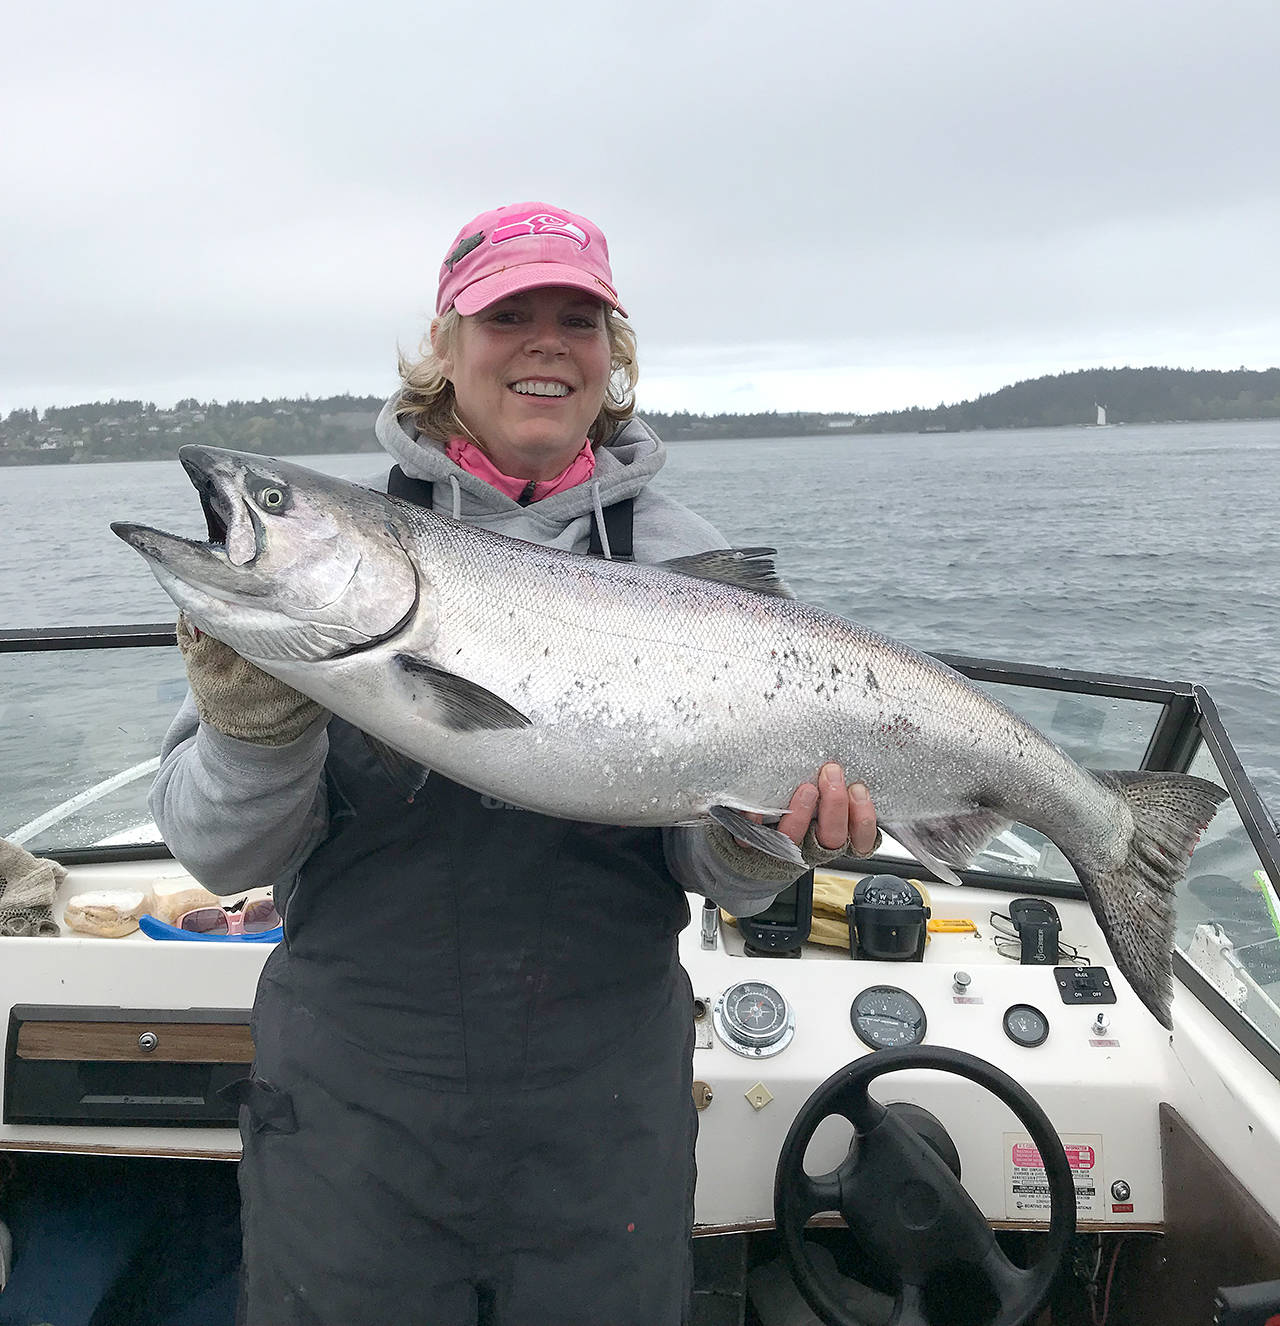 Brenda Burke and Kevin Meehan caught this 19.6-pound chinook while fishing off Port Townsend using a Silver Horde cop car lure in 130 feet of water during the 2018 blackmouth season.